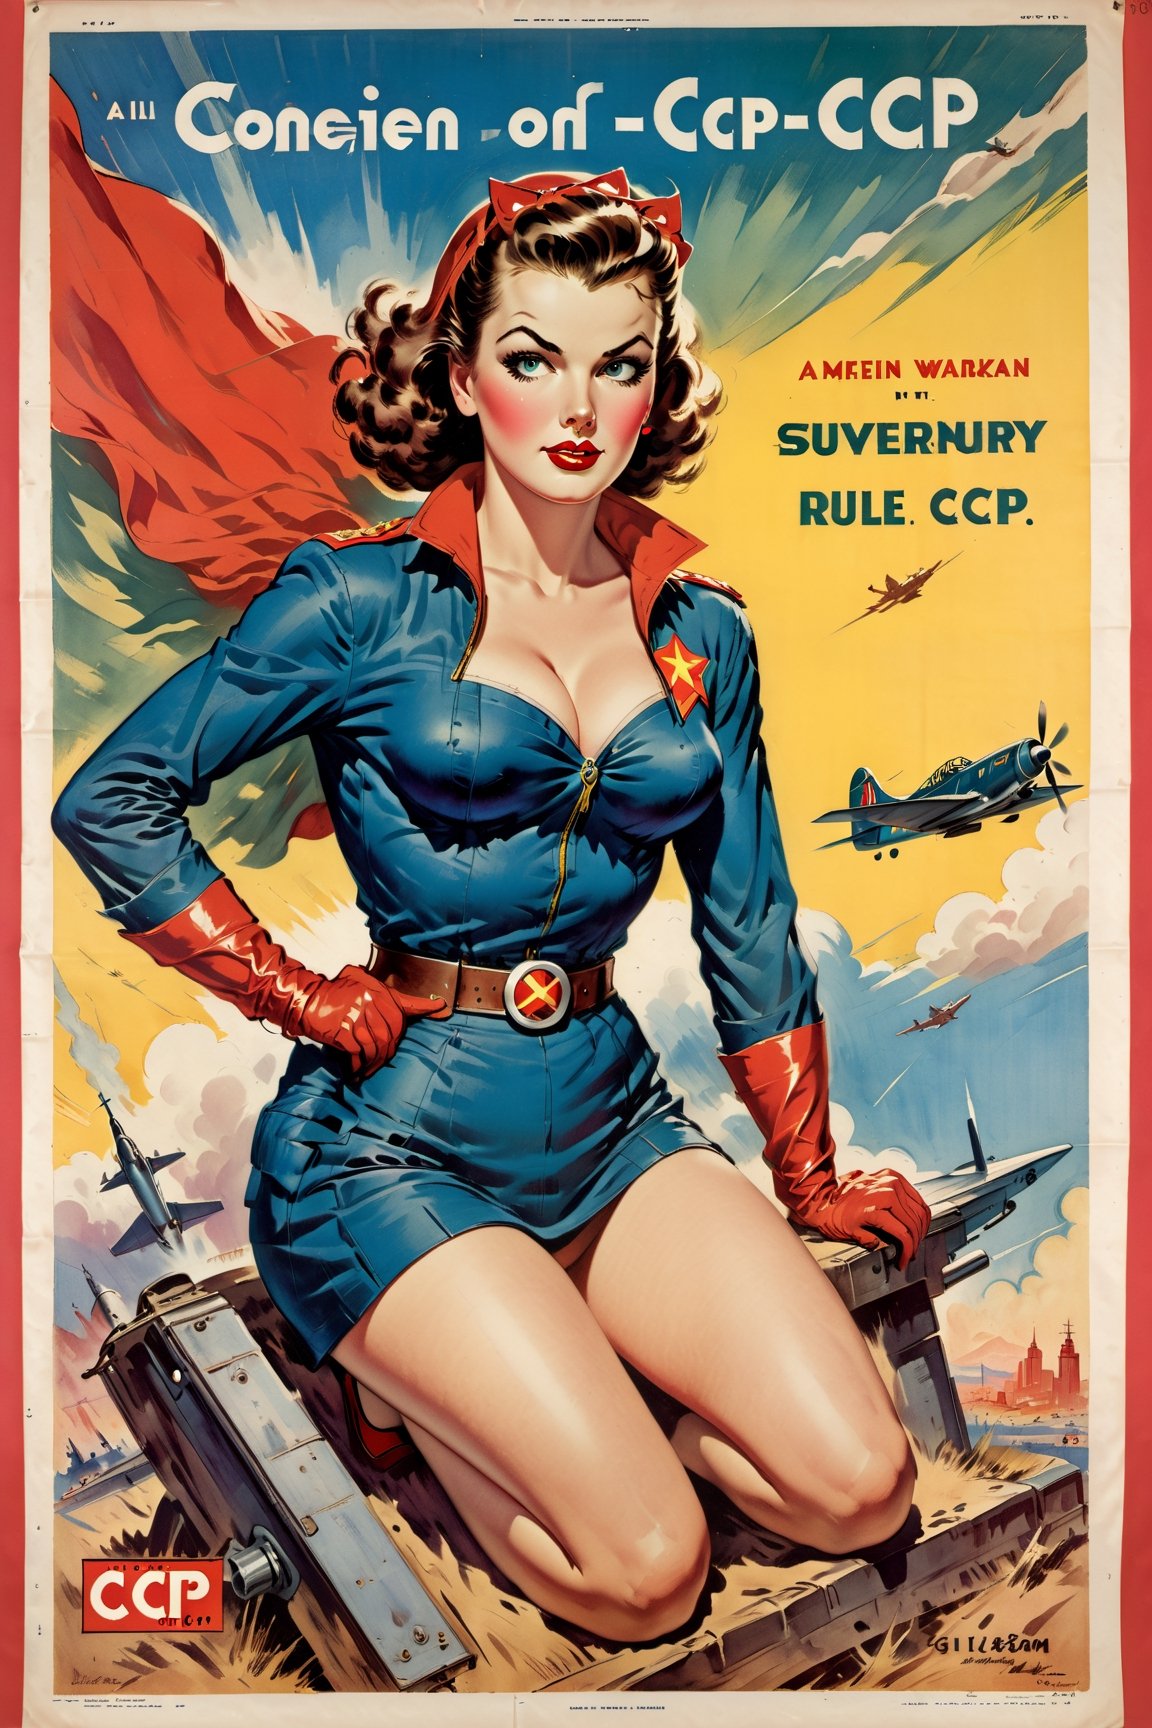 American World War II poster, Gil Elvgren style ((CCCP poster, Soviet poster)) (a medium-sized dark-haired woman with superhero outfit) Poster propaganda, poster, blue sky with fighter jet, hero uniform, 1girl, solo, good body, poster design, poster art style. 1980s, 1950s, 1960s, 1940s, basic color scheme, very colorful poster, colorful art, third rule, inspiring, woman, 1 mature girl, hair blowing in the wind, looking at the viewer, revolutionary, red and blue square background, thick legs, green eyes,Comic Book-Style 2d,2d,VintageMagStyle